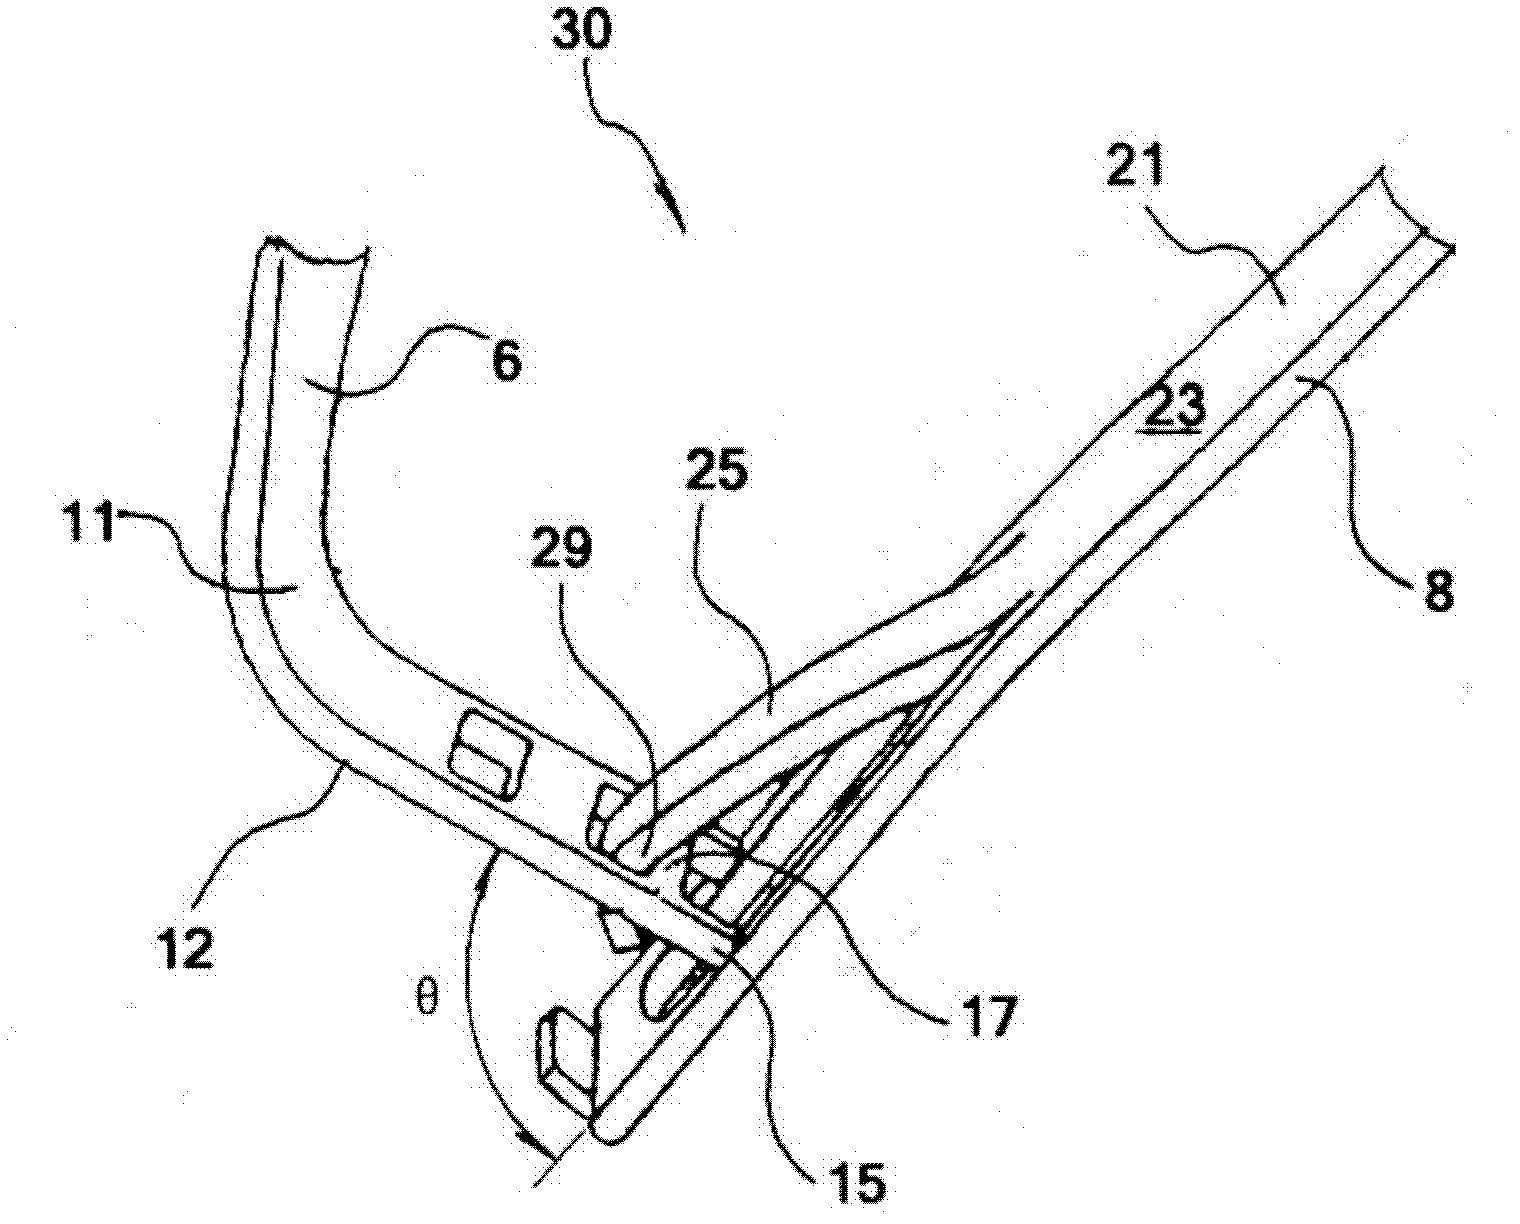 Pivot connection device of glasses earpiece and endpiece